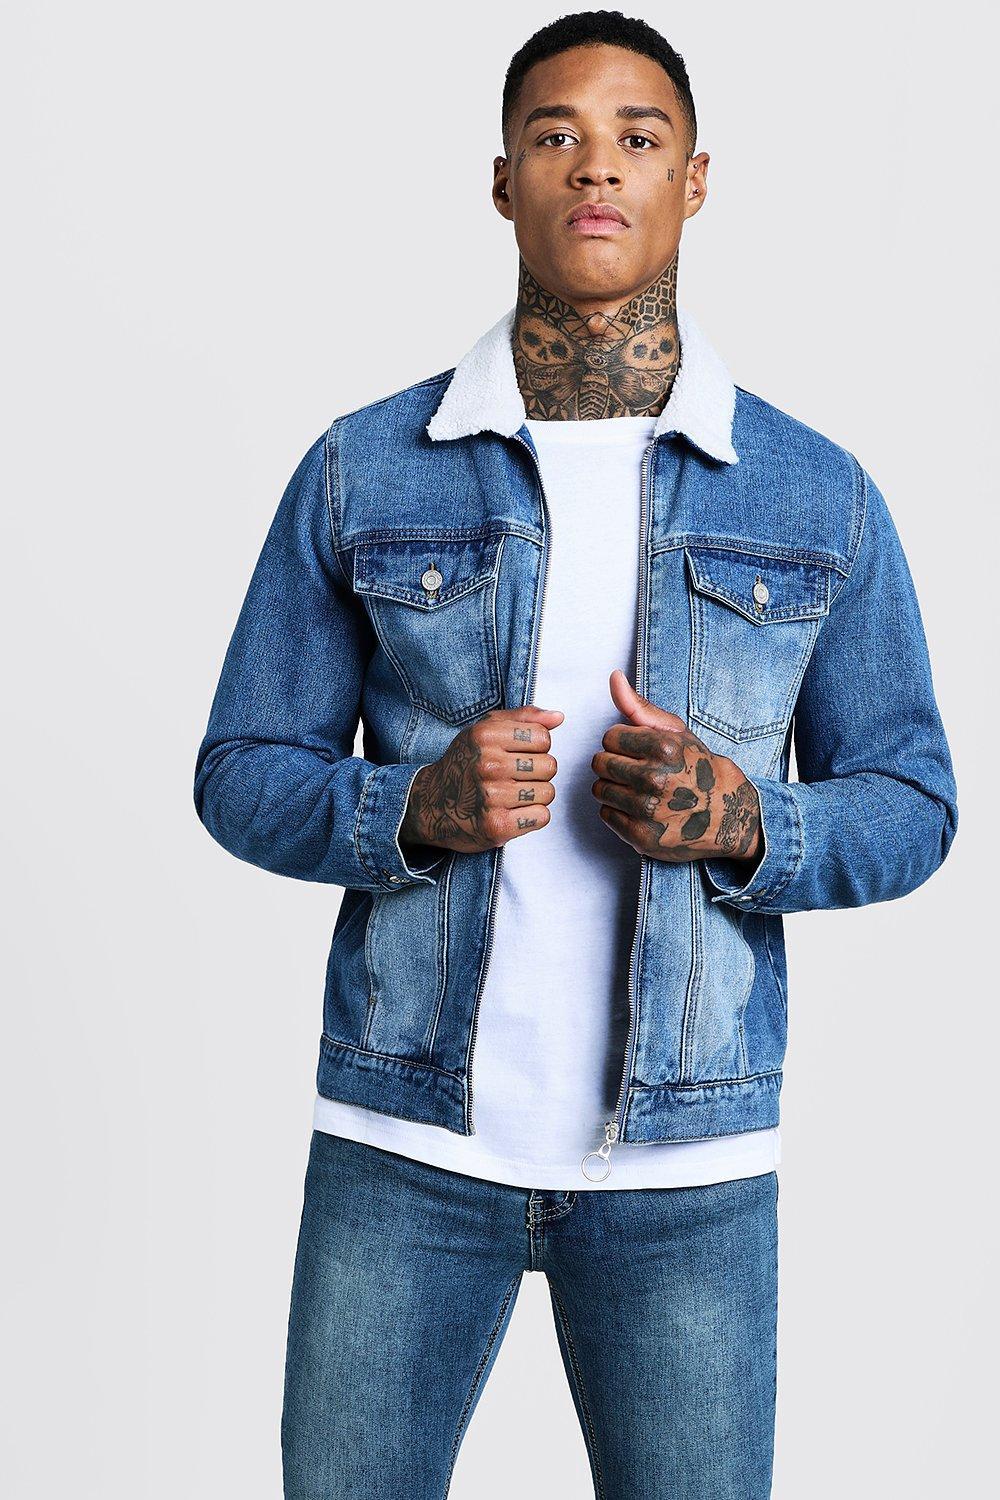 BoohooMAN Mid Blue Denim Jacket With Borg Collar in Blue for Men - Lyst